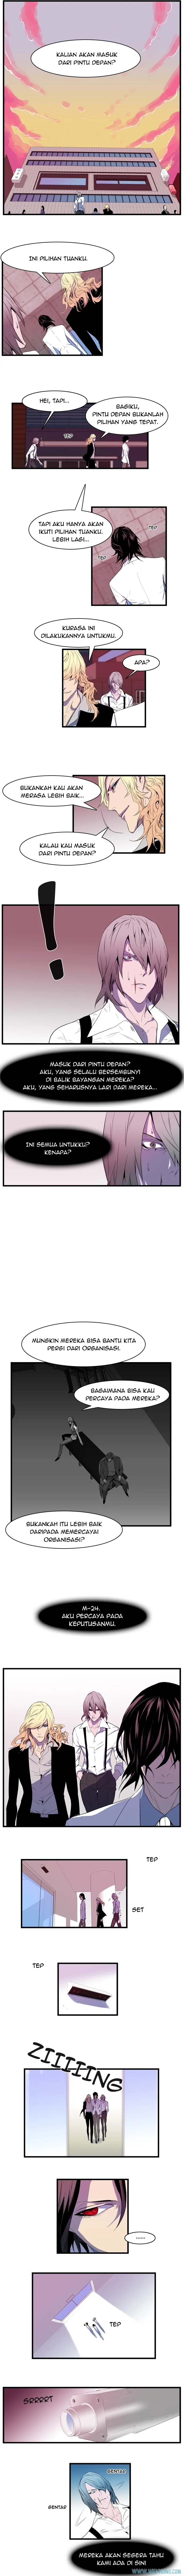 Noblesse Chapter 83 - 29